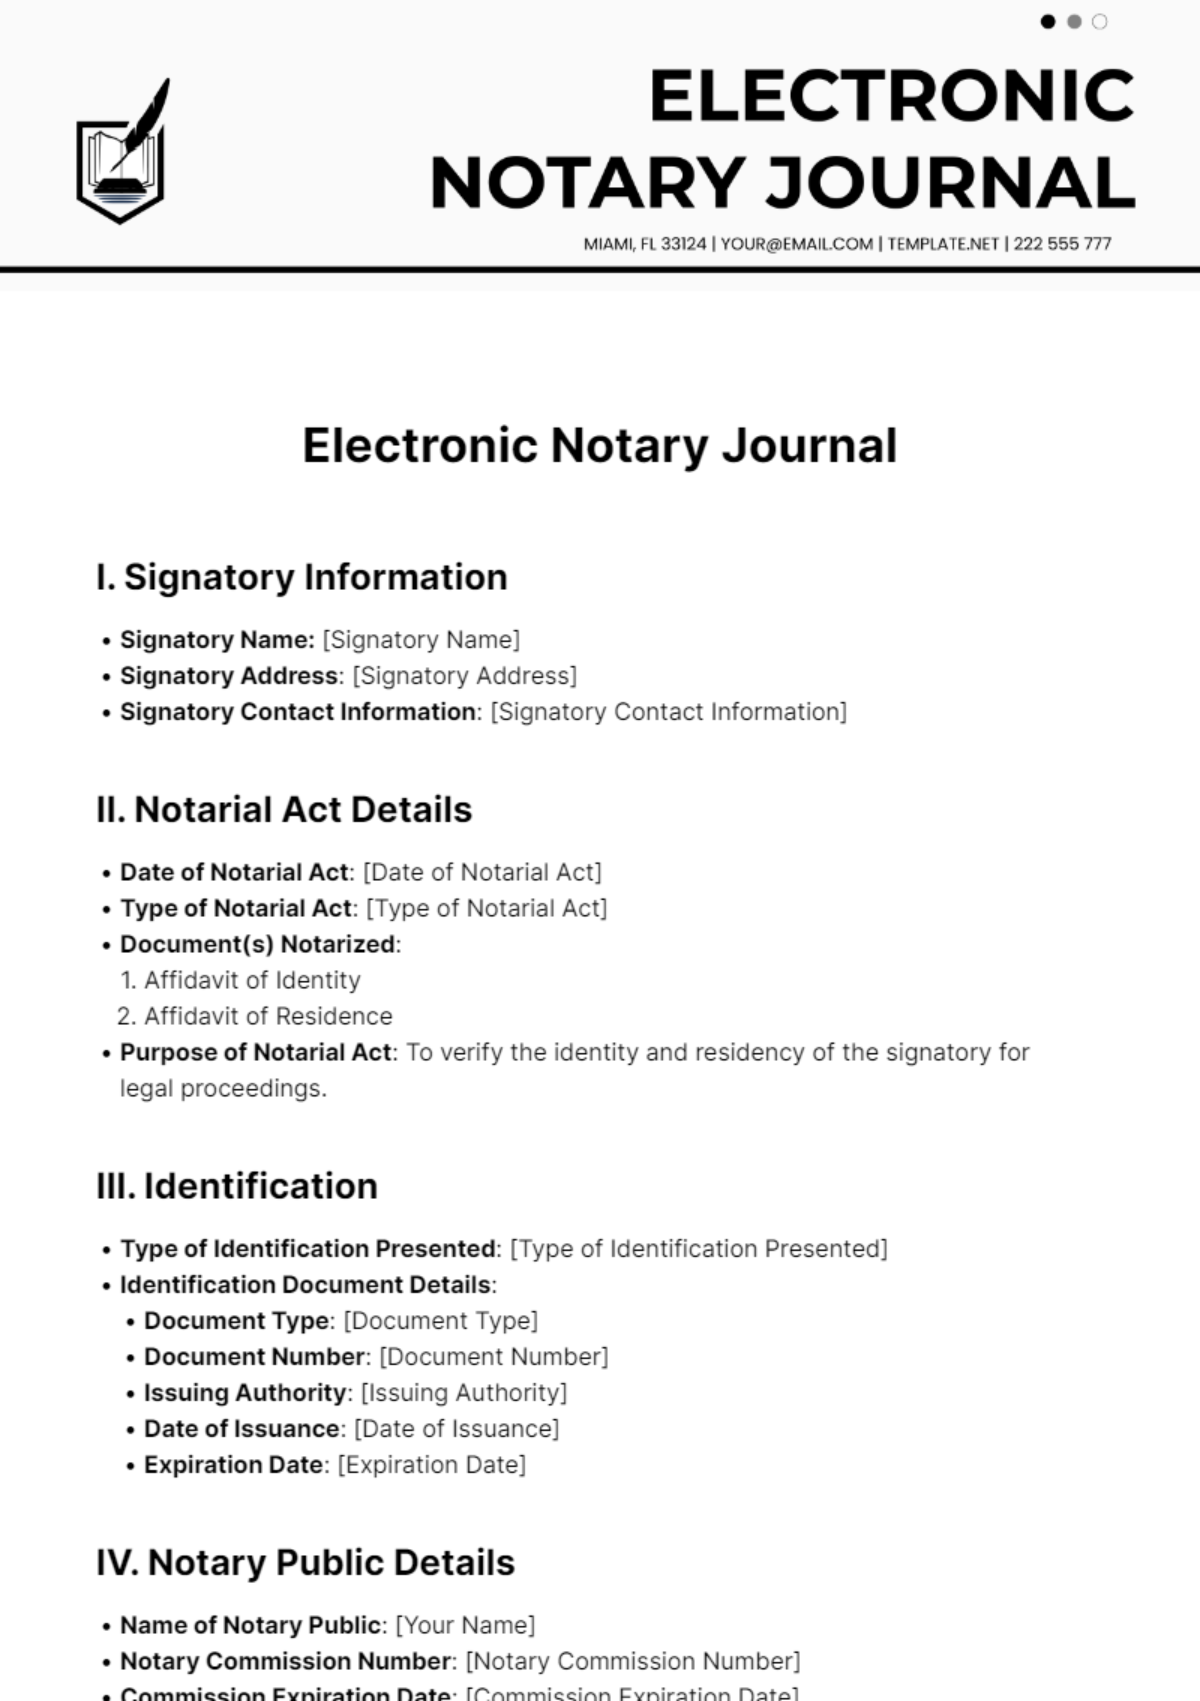 Electronic Notary Journal Template